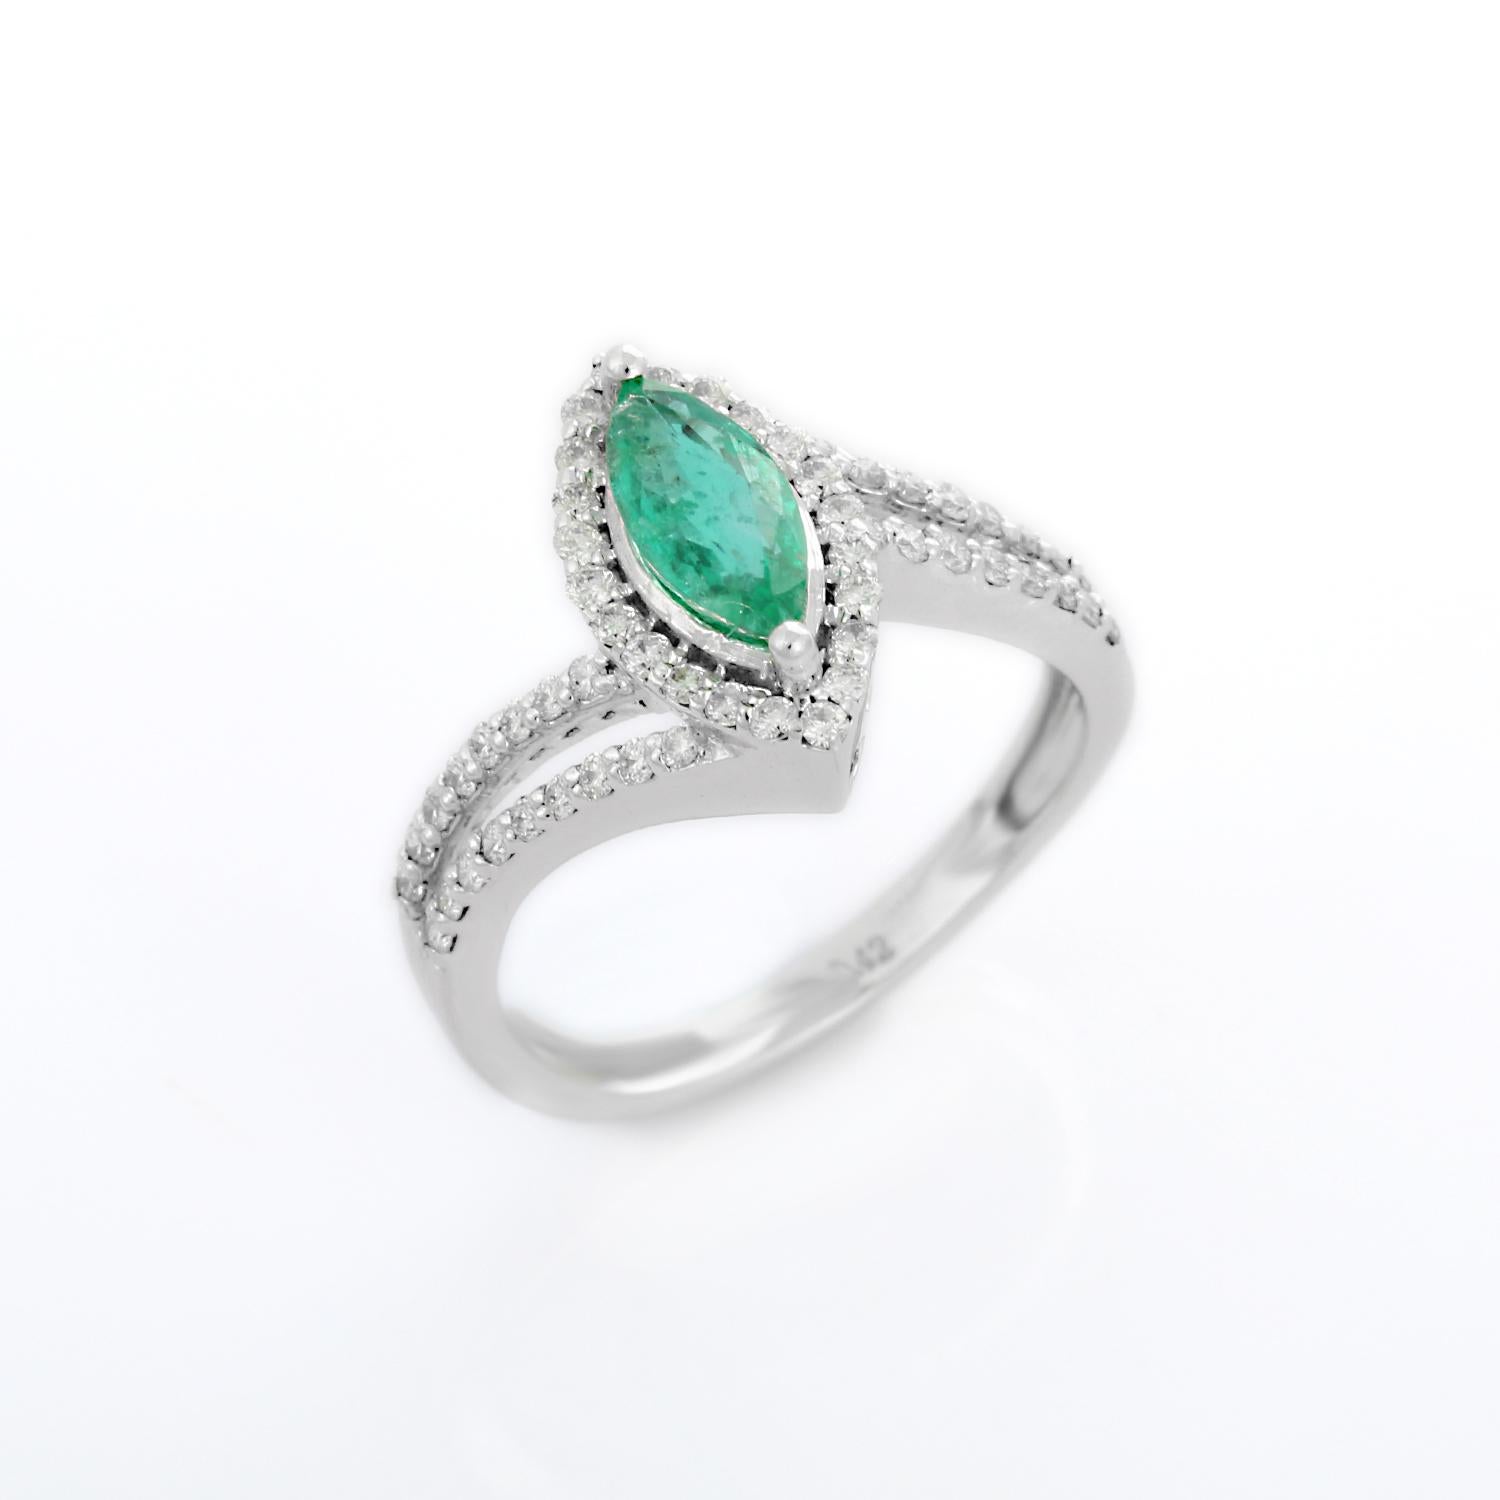 For Sale:  Marquise Shaped Emerald and Diamond Ring in 18K White Gold  10